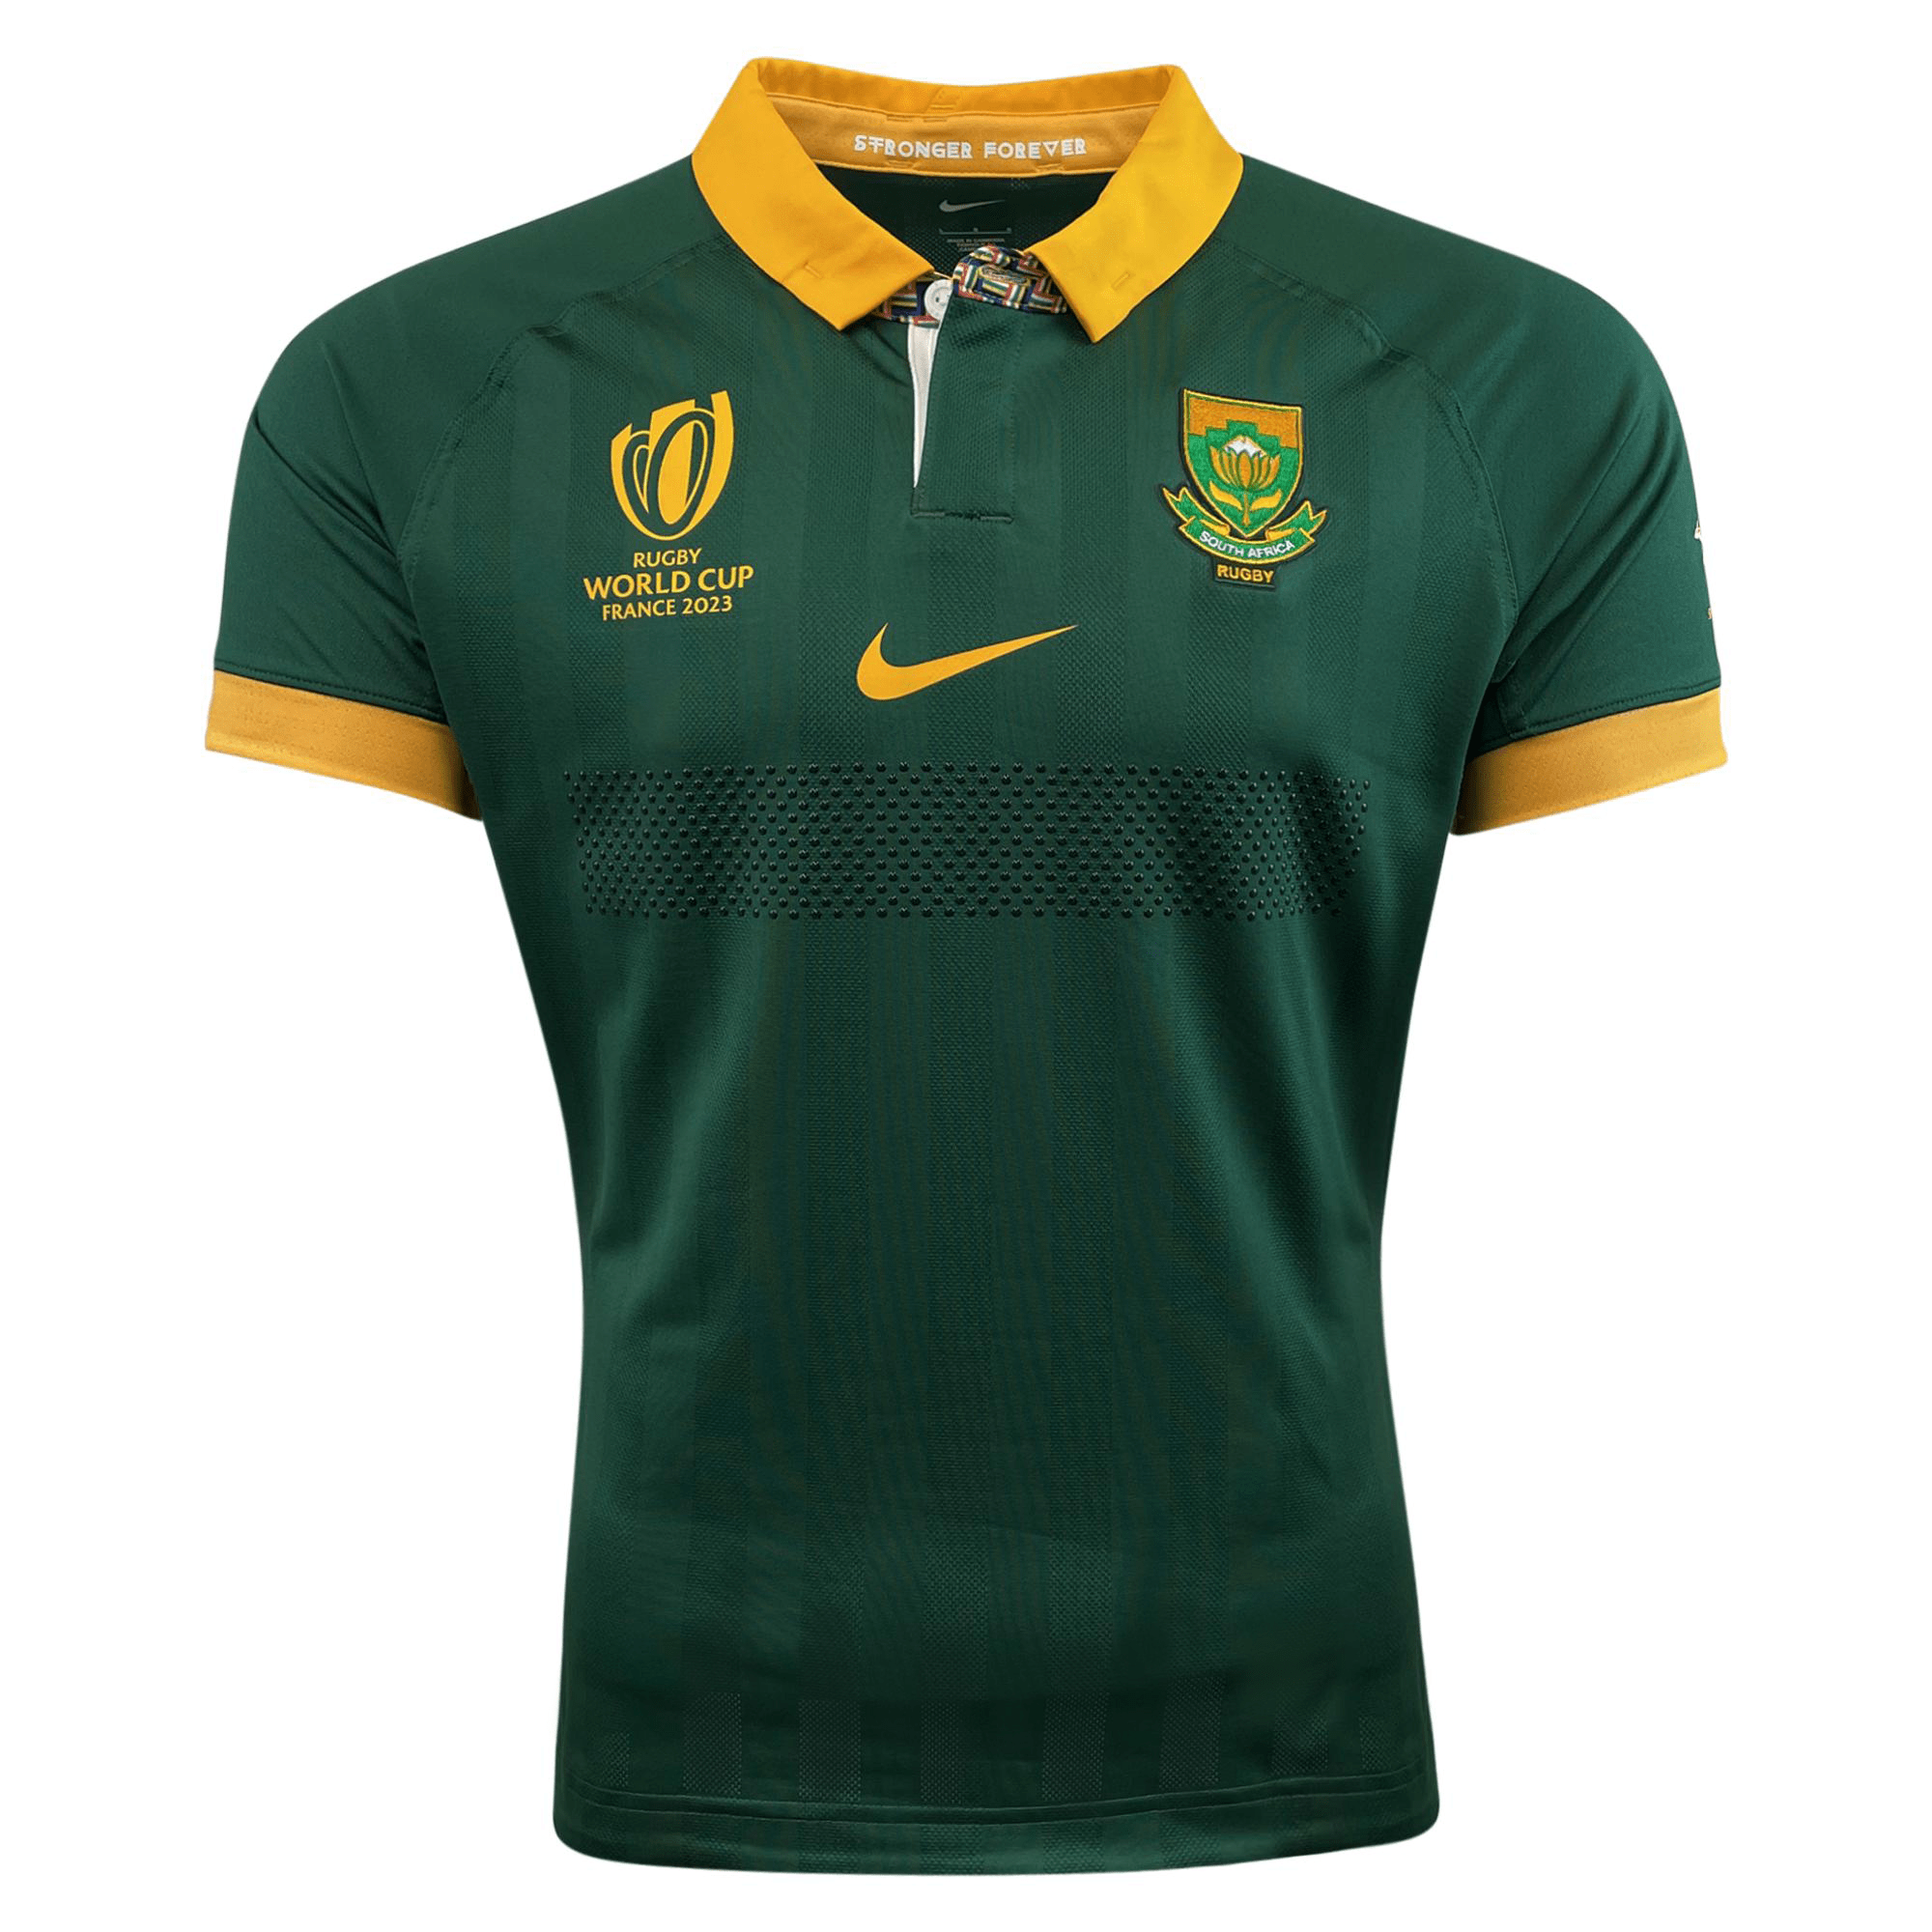 Springboks Rugby World Cup 2023 Match Home Jersey 2023 by Nike